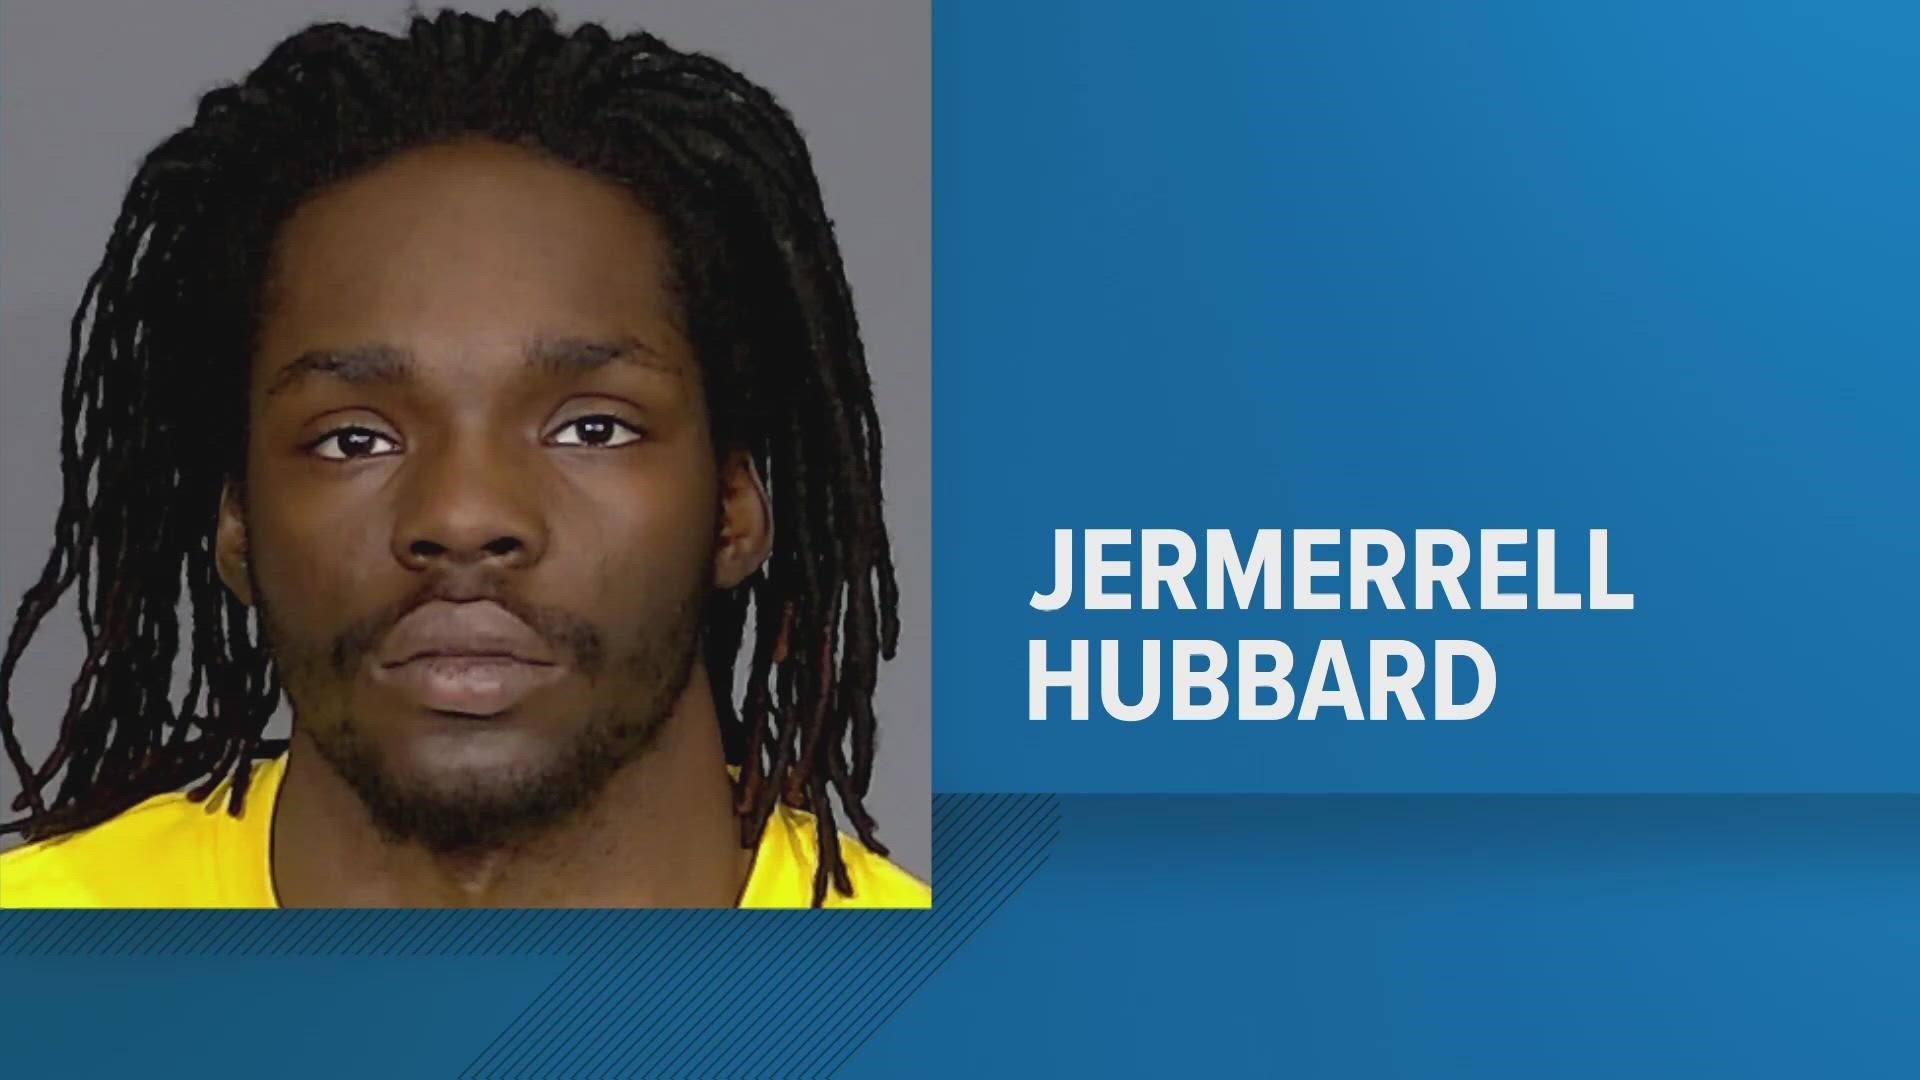 Jeremerrell Hubbard is charged with robbery and murder for the death of Brian Ward Junior on January 30th